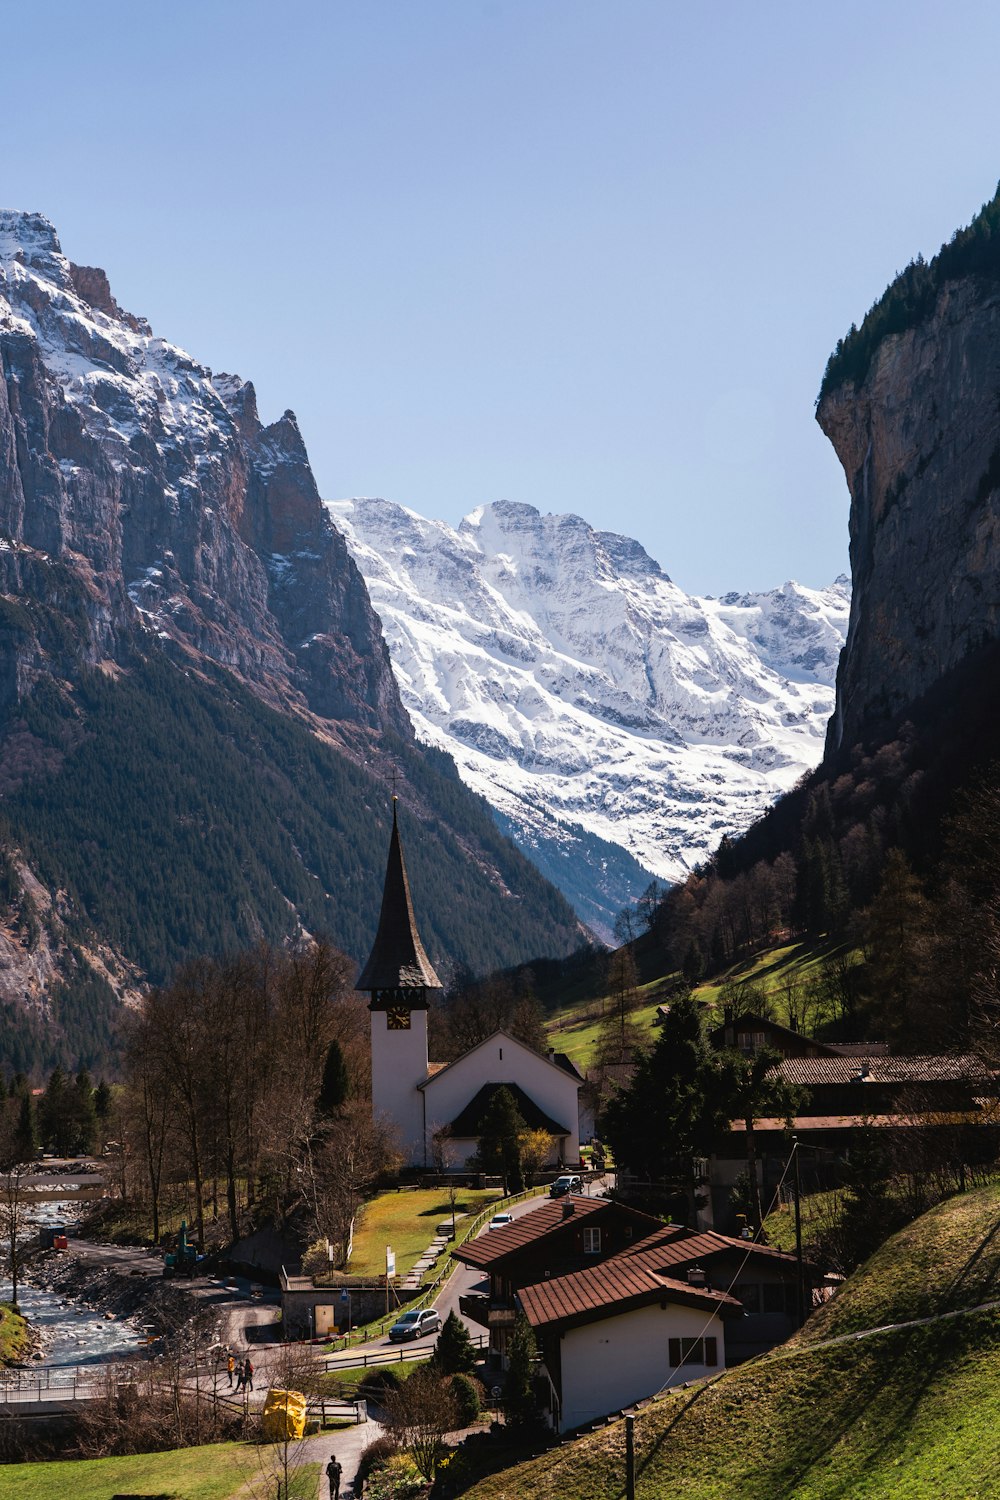 a church in the middle of a valley with mountains in the background